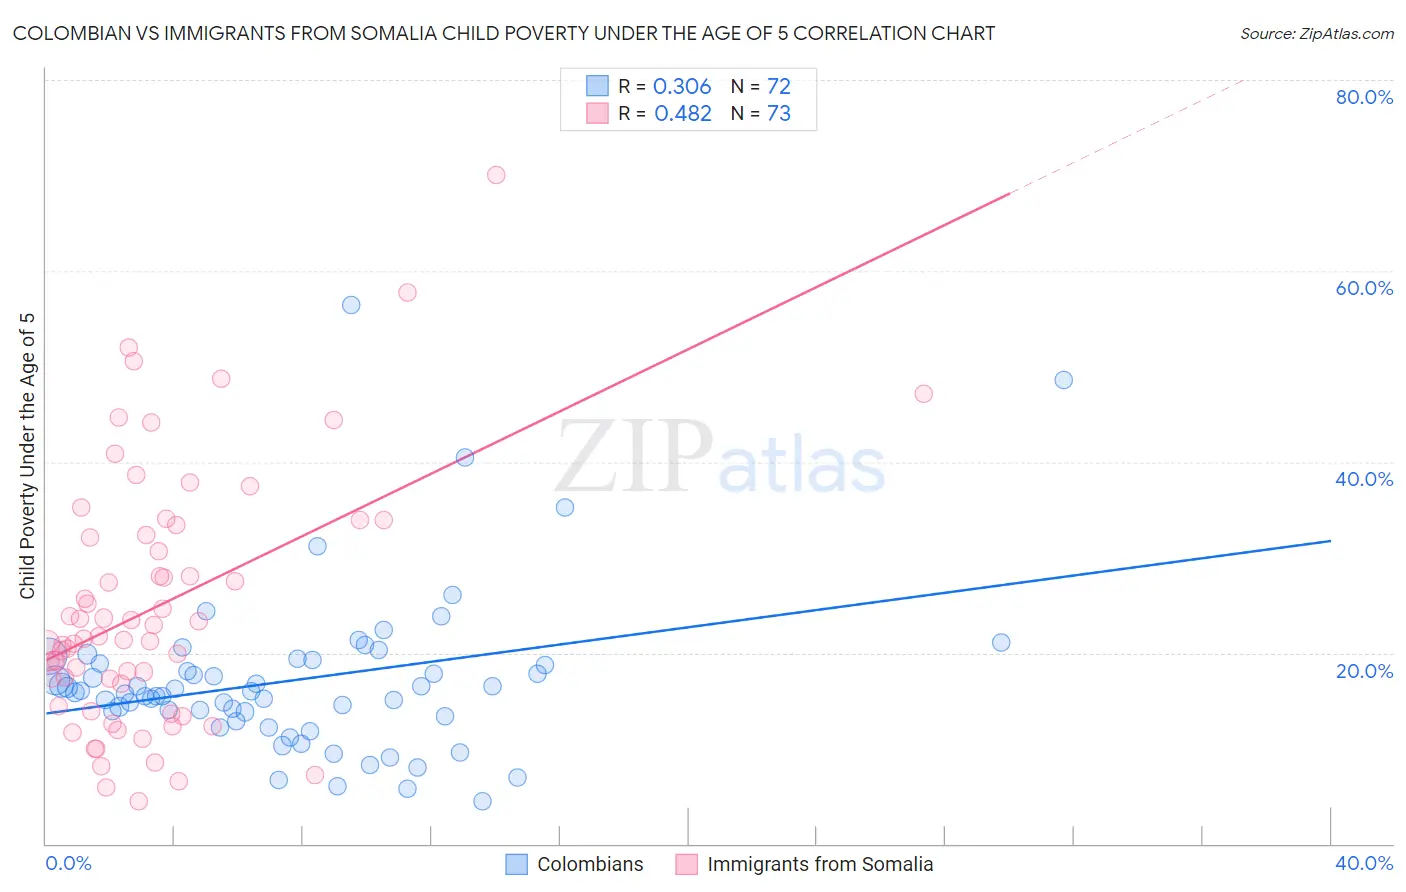 Colombian vs Immigrants from Somalia Child Poverty Under the Age of 5